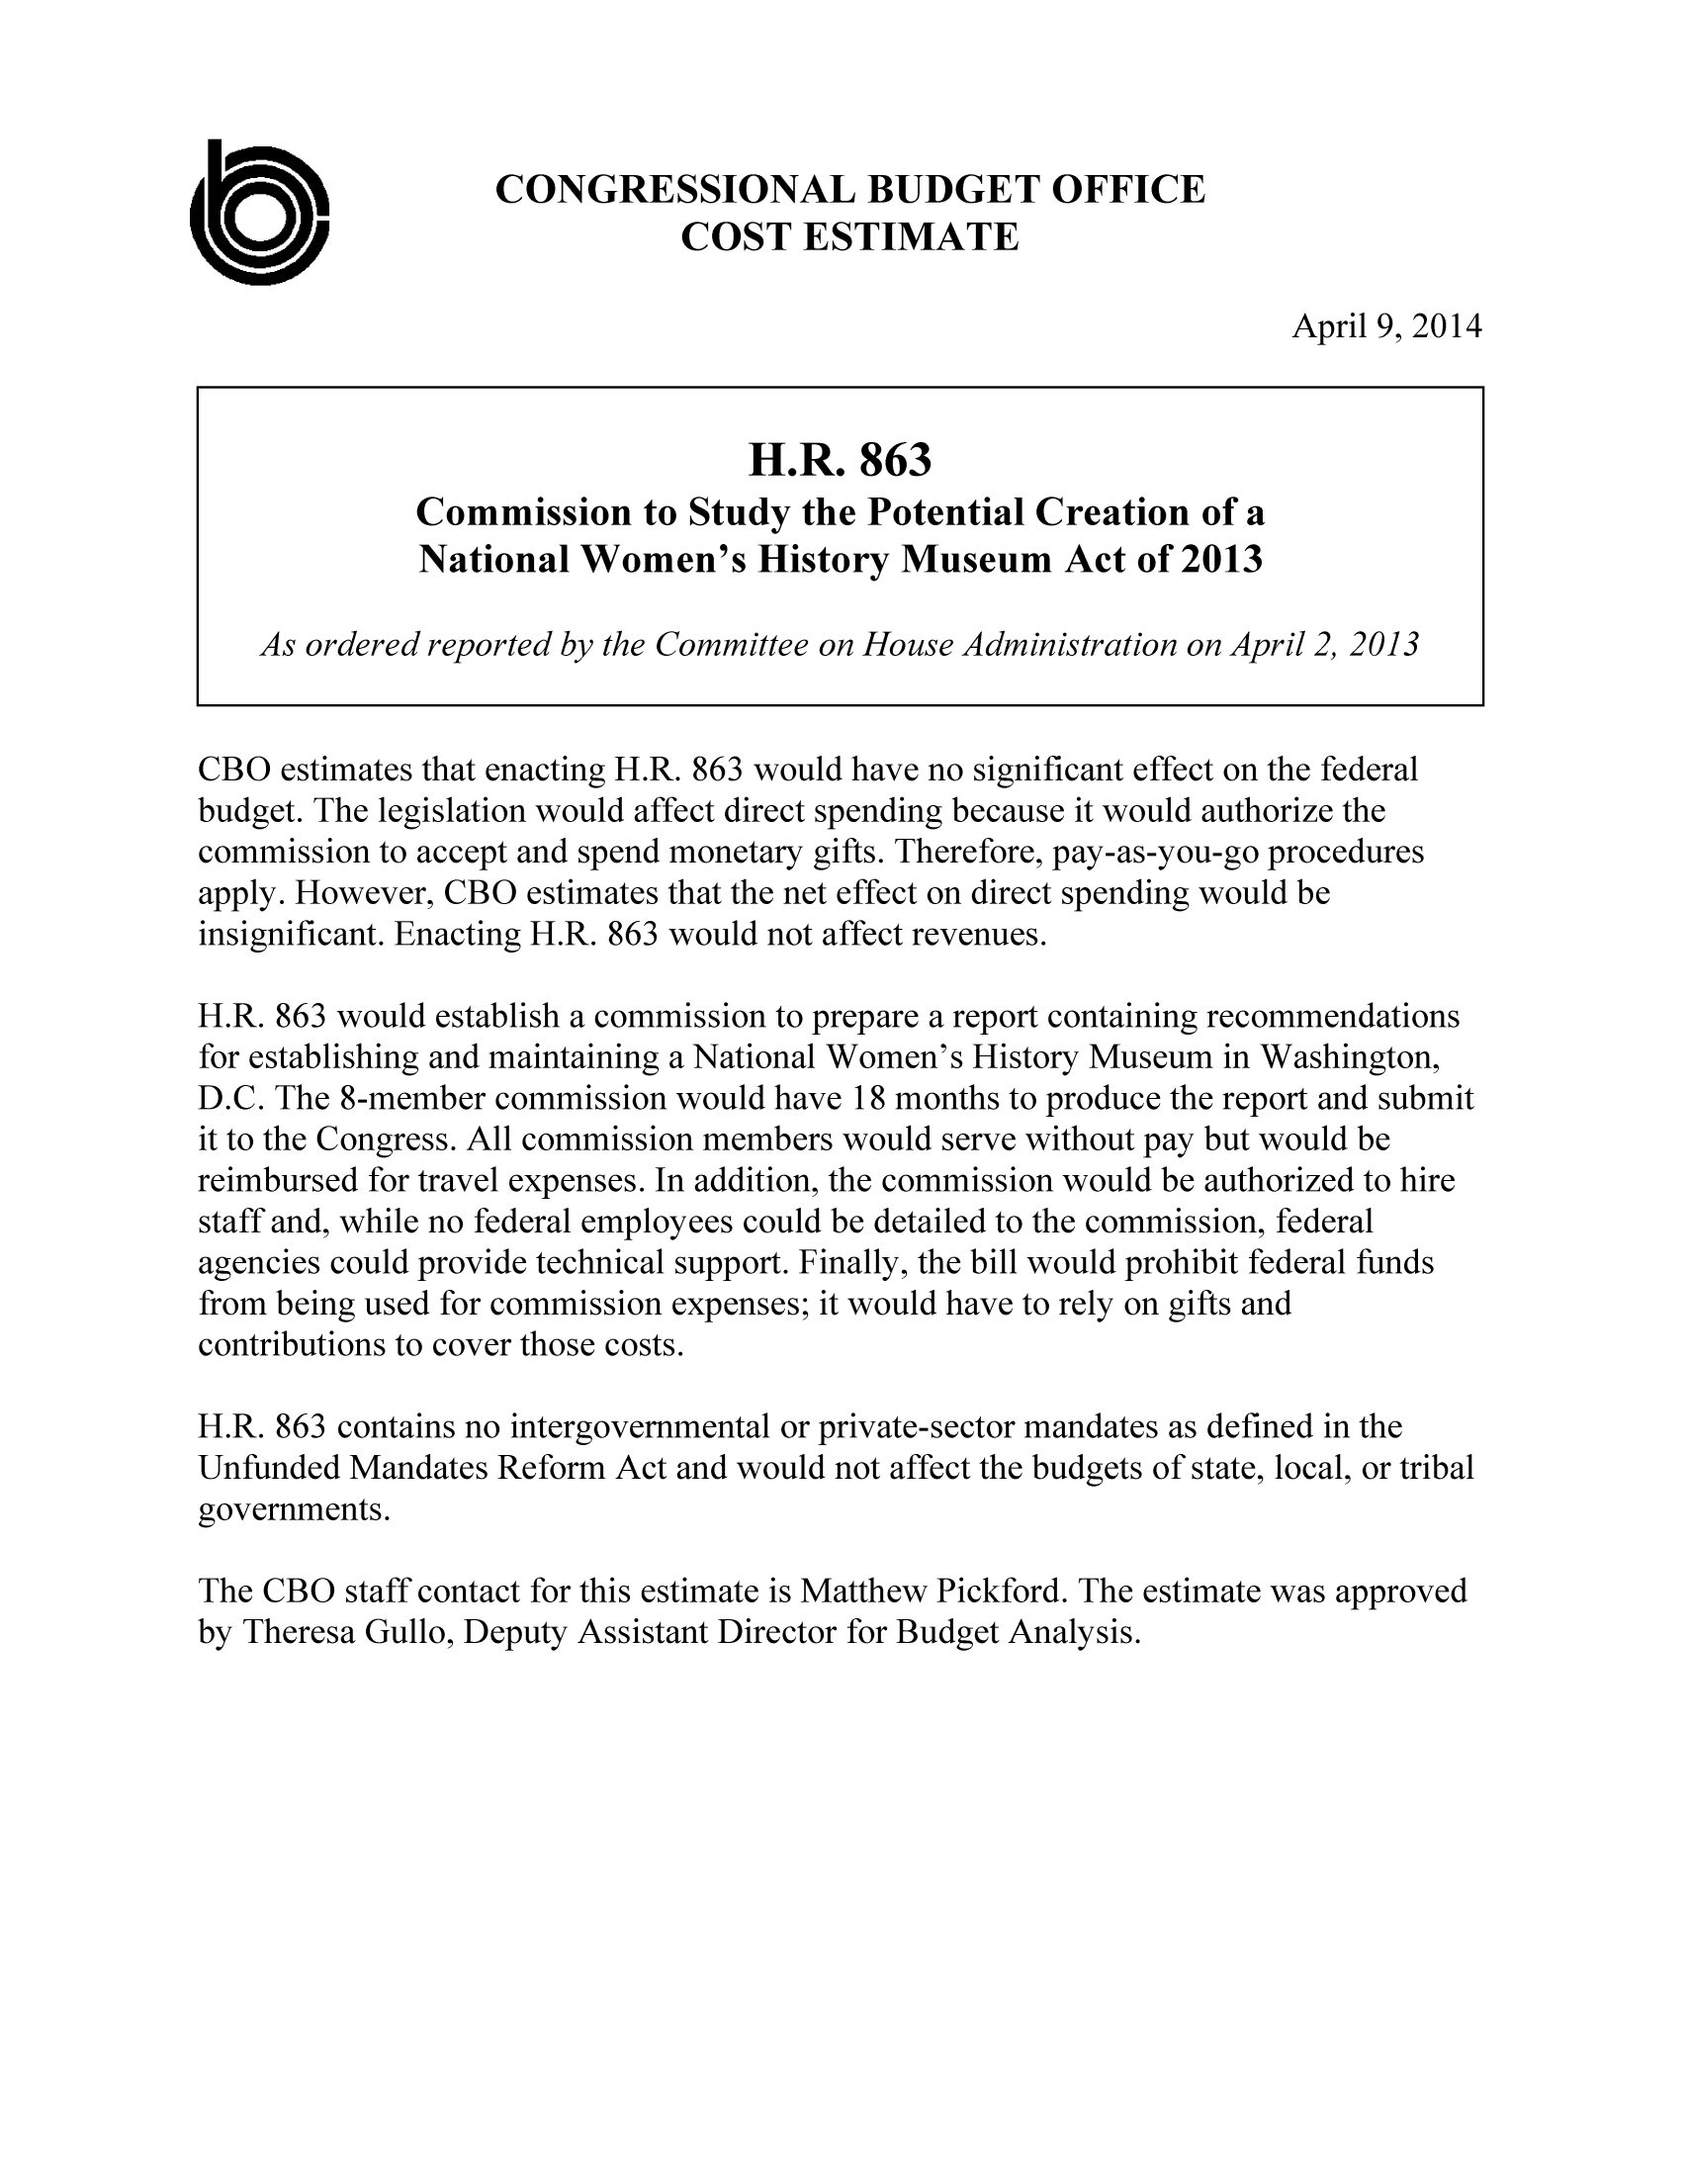 handle is hein.congrec/cbo1552 and id is 1 raw text is: CONGRESSIONAL BUDGET OFFICE
COST ESTIMATE
April 9, 2014
H.R. 863
Commission to Study the Potential Creation of a
National Women's History Museum Act of 2013
As ordered reported by the Committee on House Administration on April 2, 2013
CBO estimates that enacting H.R. 863 would have no significant effect on the federal
budget. The legislation would affect direct spending because it would authorize the
commission to accept and spend monetary gifts. Therefore, pay-as-you-go procedures
apply. However, CBO estimates that the net effect on direct spending would be
insignificant. Enacting H.R. 863 would not affect revenues.
H.R. 863 would establish a commission to prepare a report containing recommendations
for establishing and maintaining a National Women's History Museum in Washington,
D.C. The 8-member commission would have 18 months to produce the report and submit
it to the Congress. All commission members would serve without pay but would be
reimbursed for travel expenses. In addition, the commission would be authorized to hire
staff and, while no federal employees could be detailed to the commission, federal
agencies could provide technical support. Finally, the bill would prohibit federal funds
from being used for commission expenses; it would have to rely on gifts and
contributions to cover those costs.
H.R. 863 contains no intergovernmental or private-sector mandates as defined in the
Unfunded Mandates Reform Act and would not affect the budgets of state, local, or tribal
governments.
The CBO staff contact for this estimate is Matthew Pickford. The estimate was approved
by Theresa Gullo, Deputy Assistant Director for Budget Analysis.


